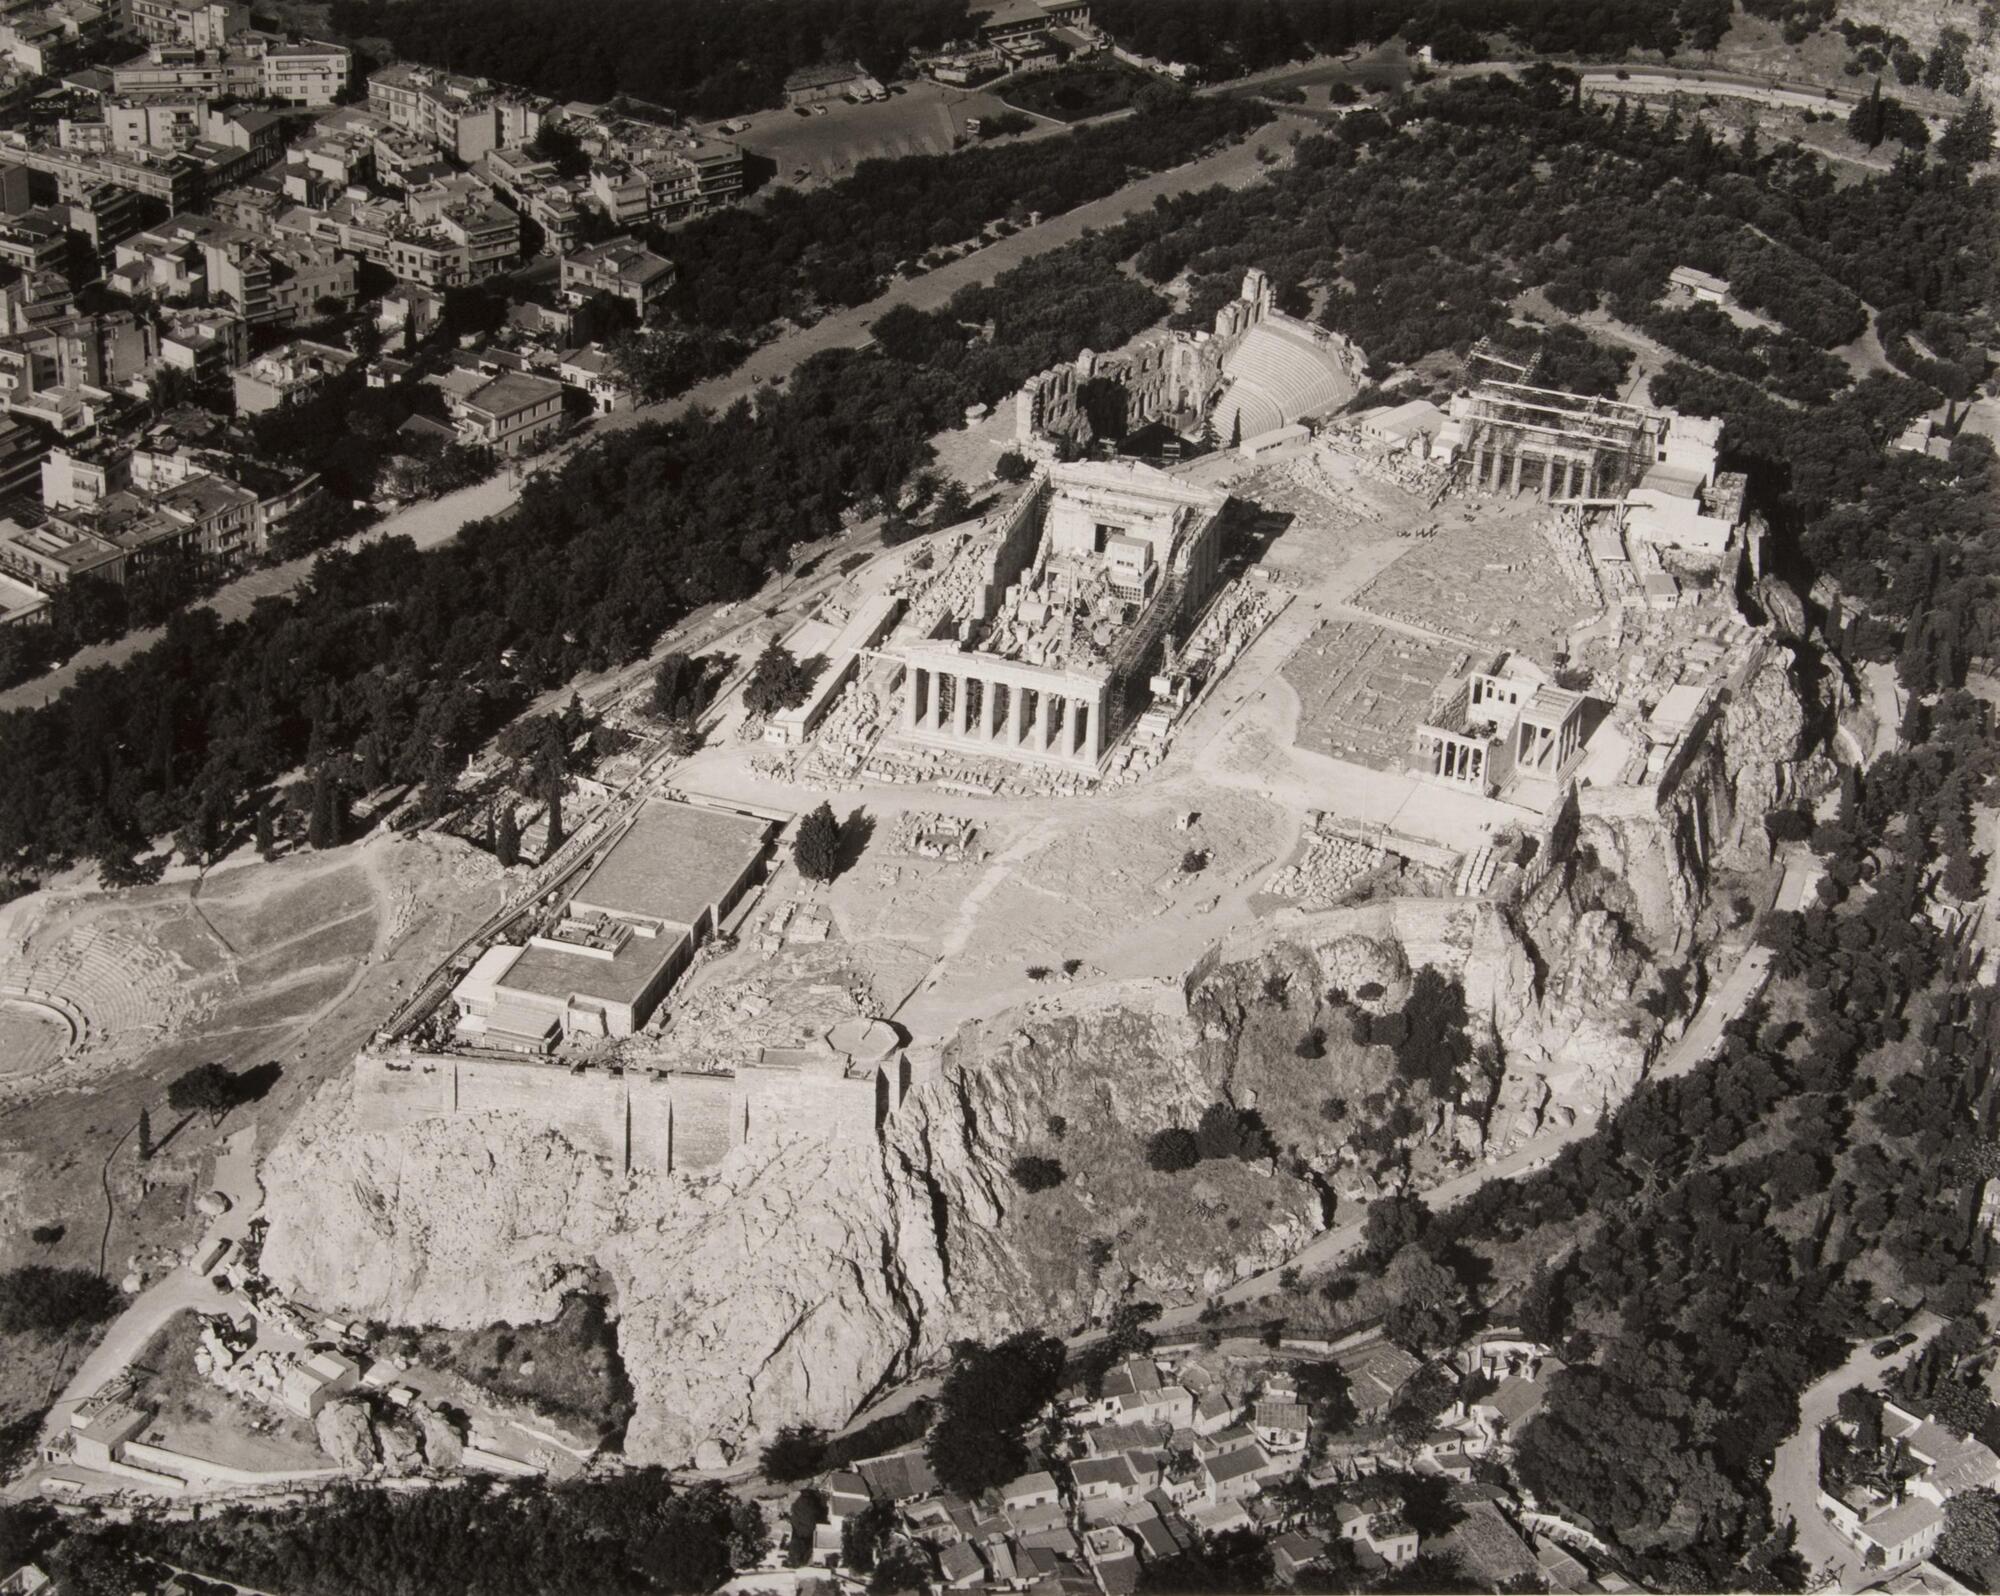 This photograph depicts an aerial view of a hilltop full of ancient monuments.